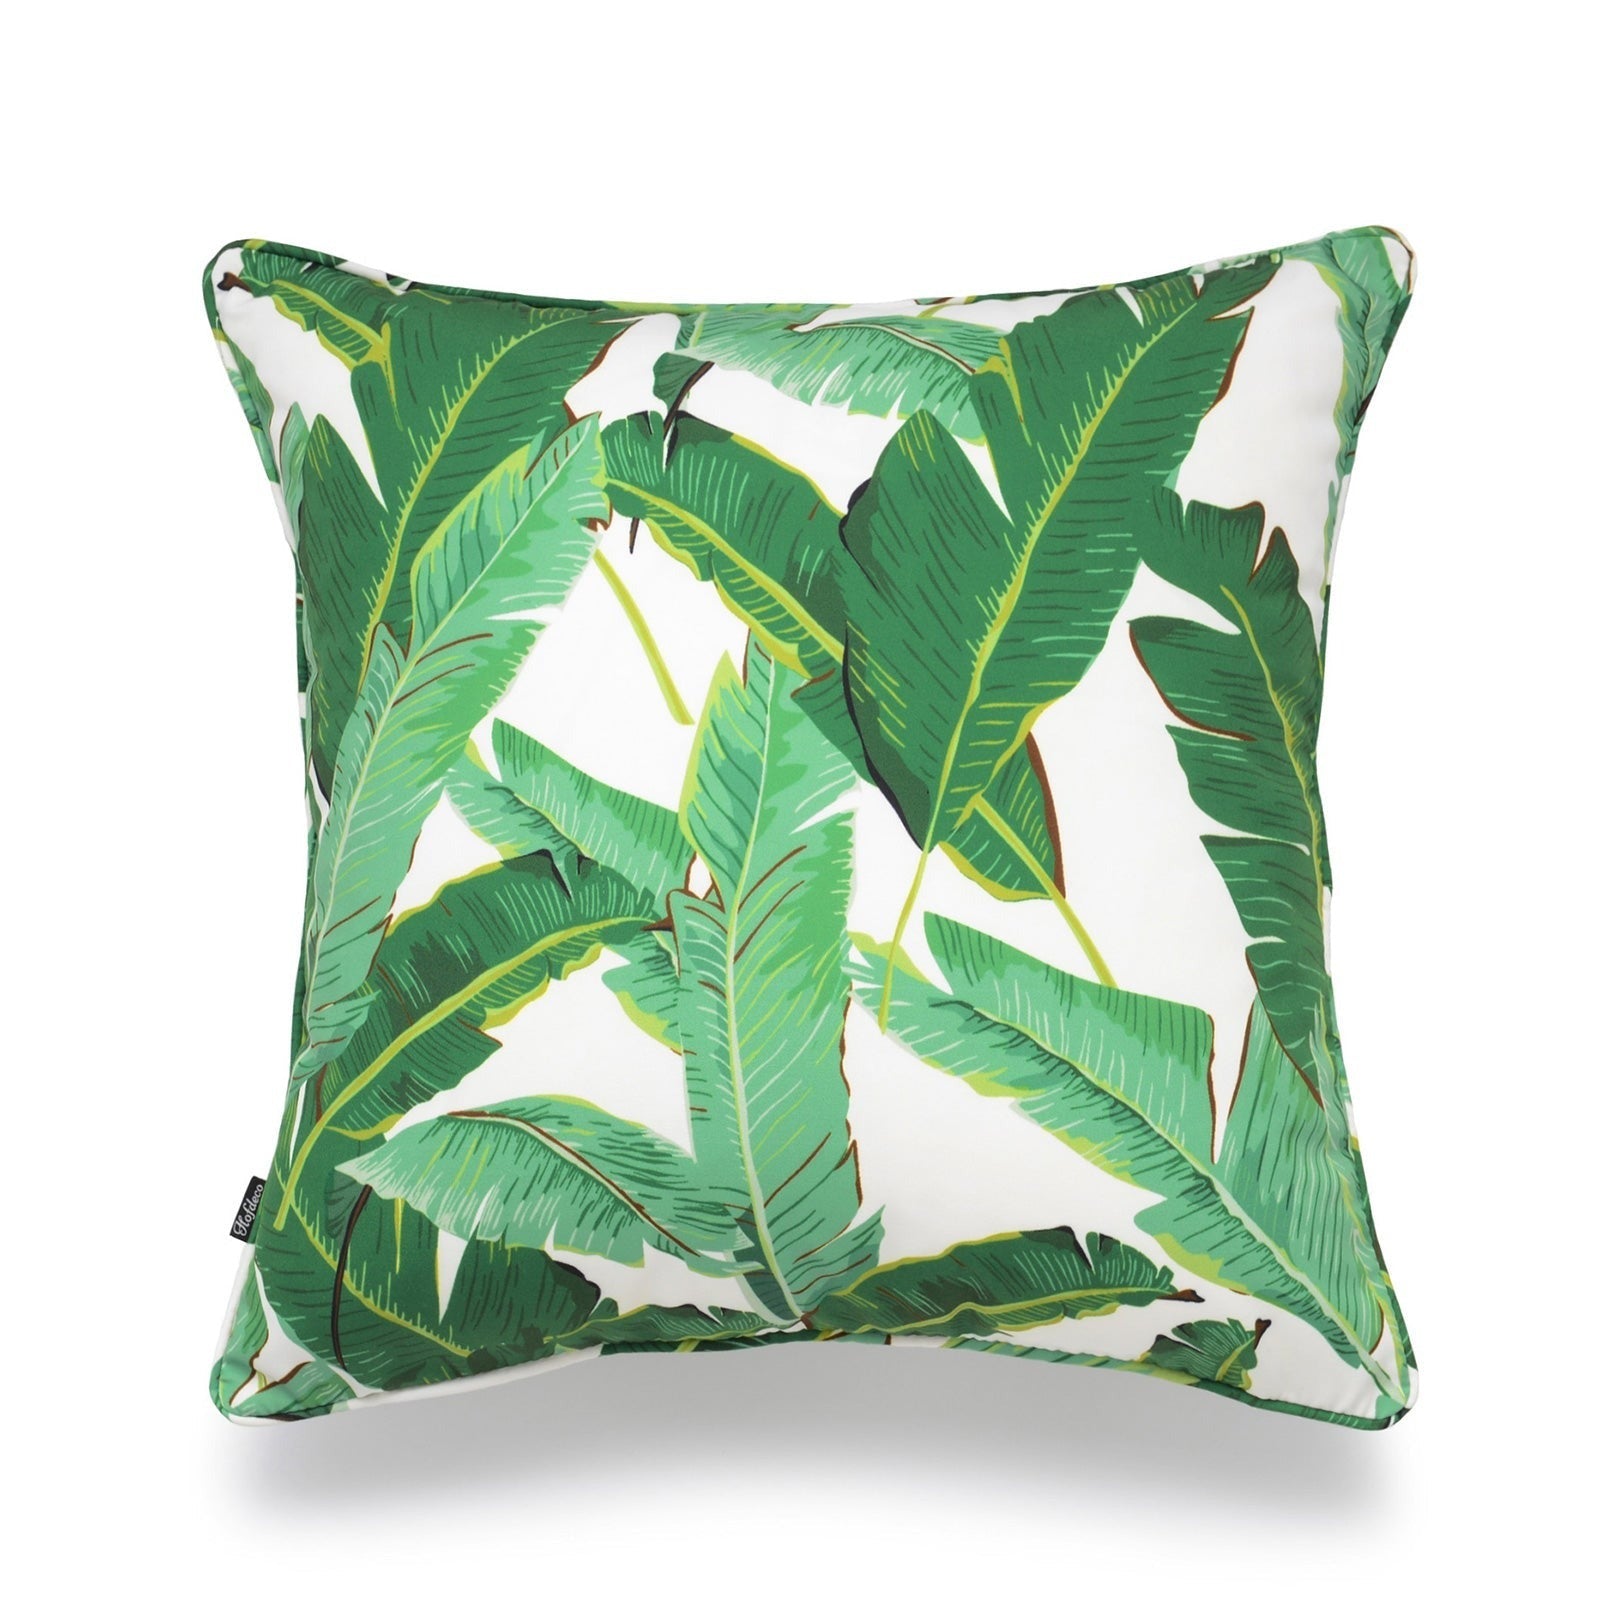 Tropical Banana Leaf Outdoor Pillow Cover, 18"x18"